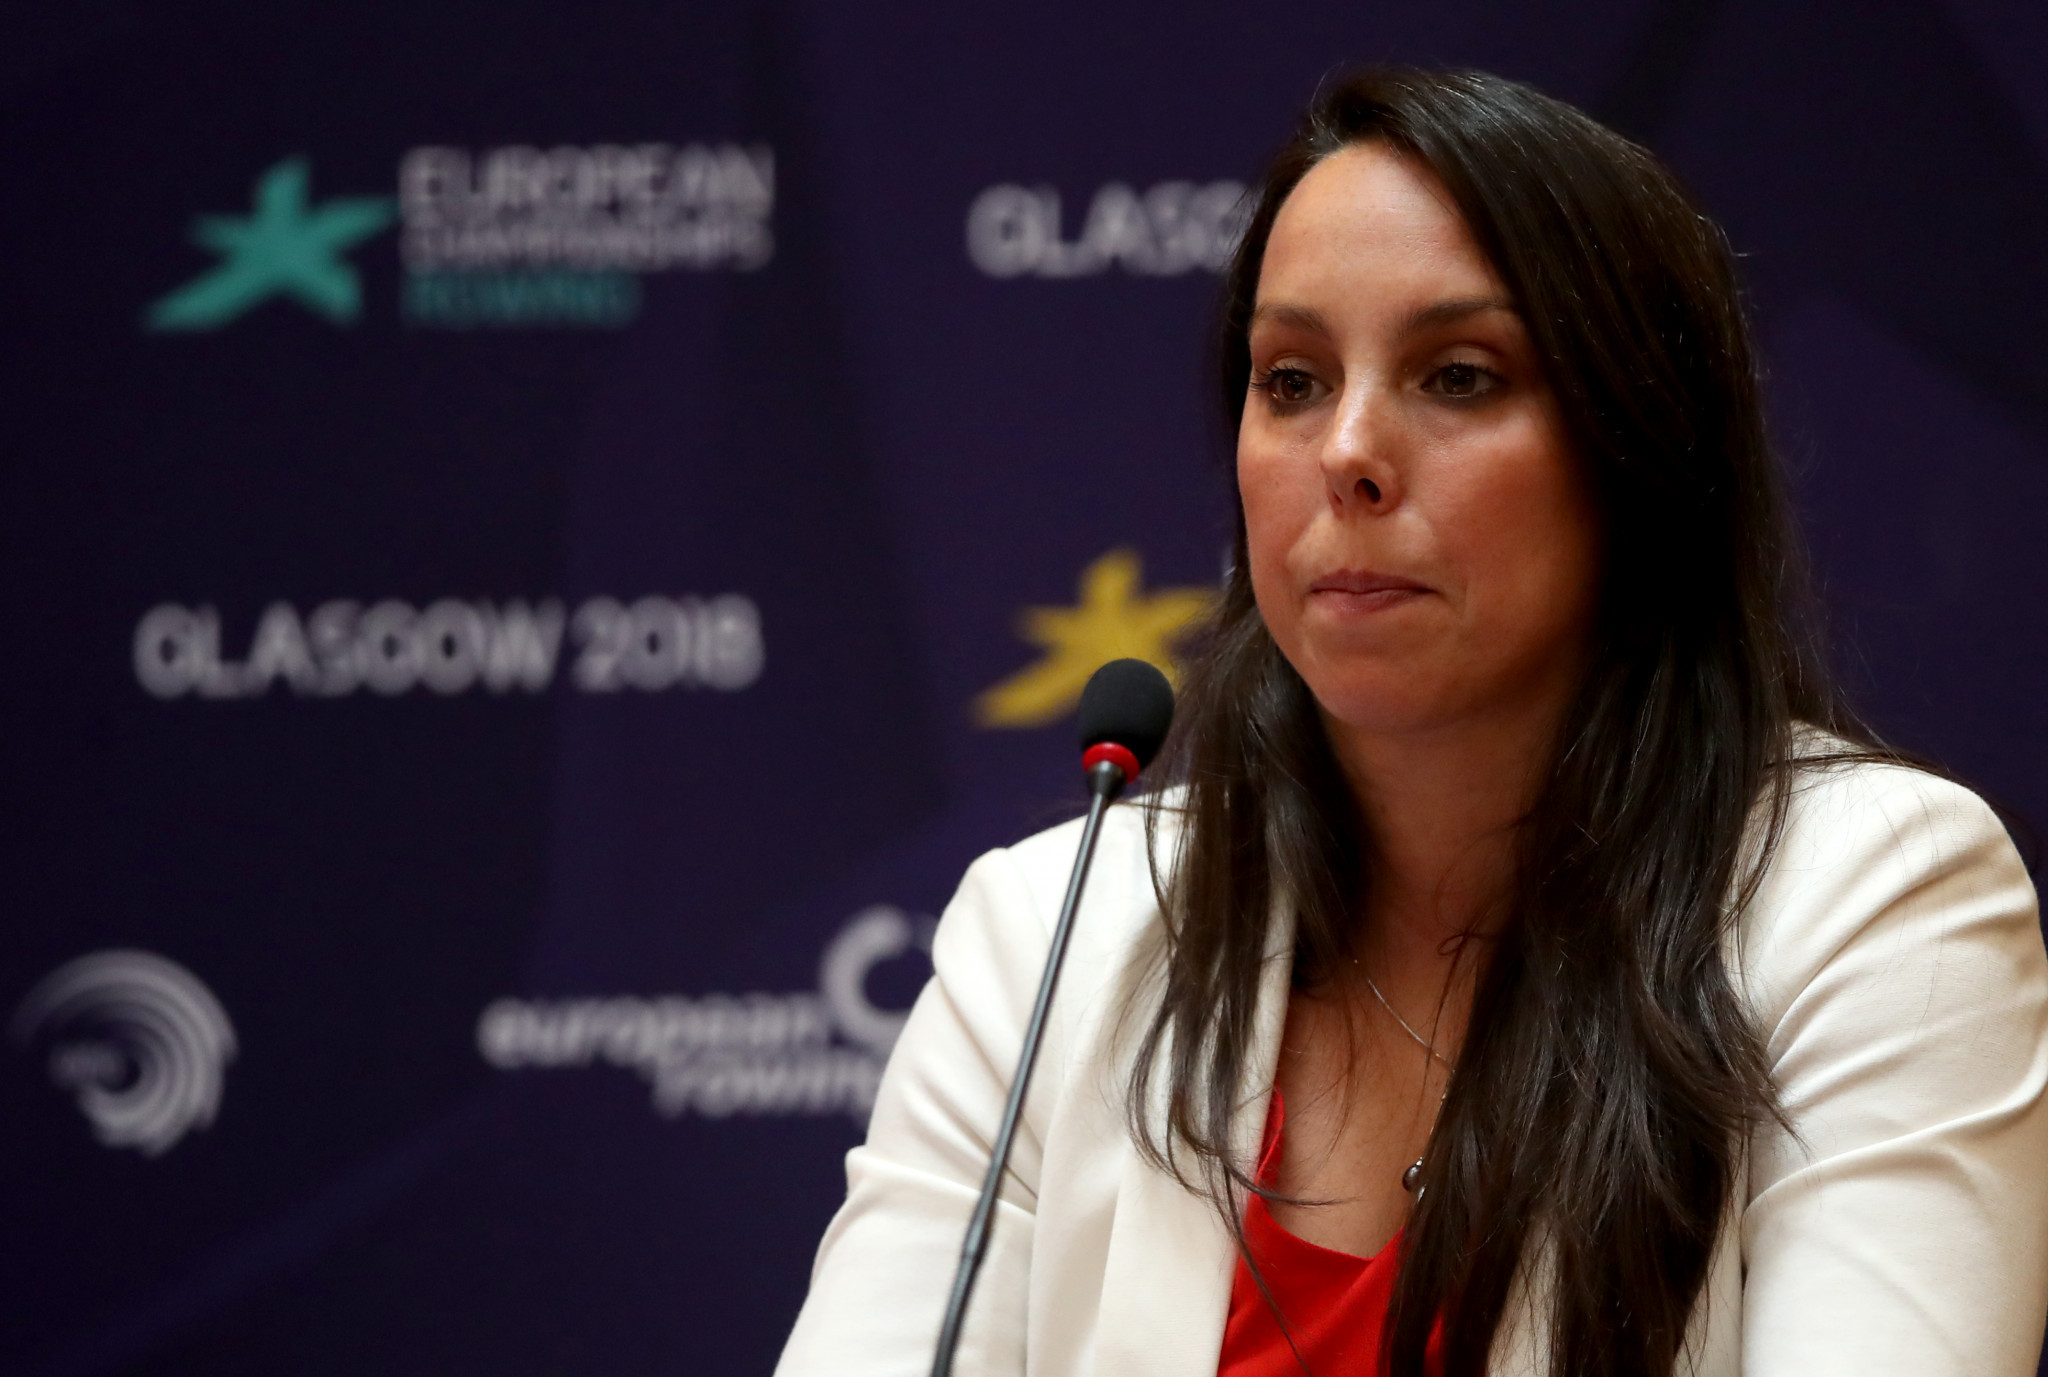 Olympic medallist Beth Tweddle has called on all gymnasts to speak out if they feel they have been mistreated ©Getty Images